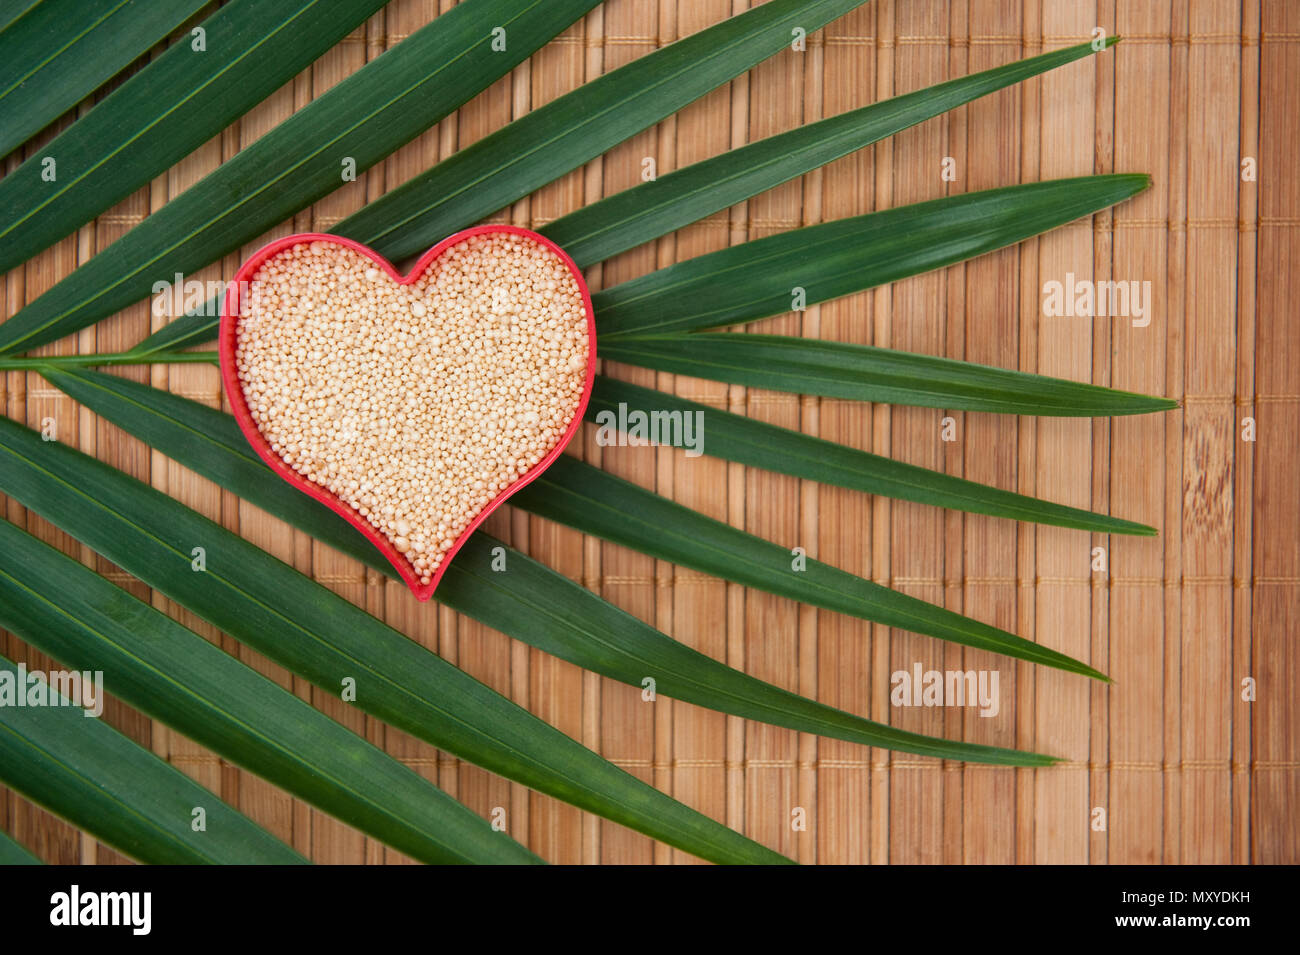 Heart filled with amaranth on a bamboo mat with a palm branch Stock Photo